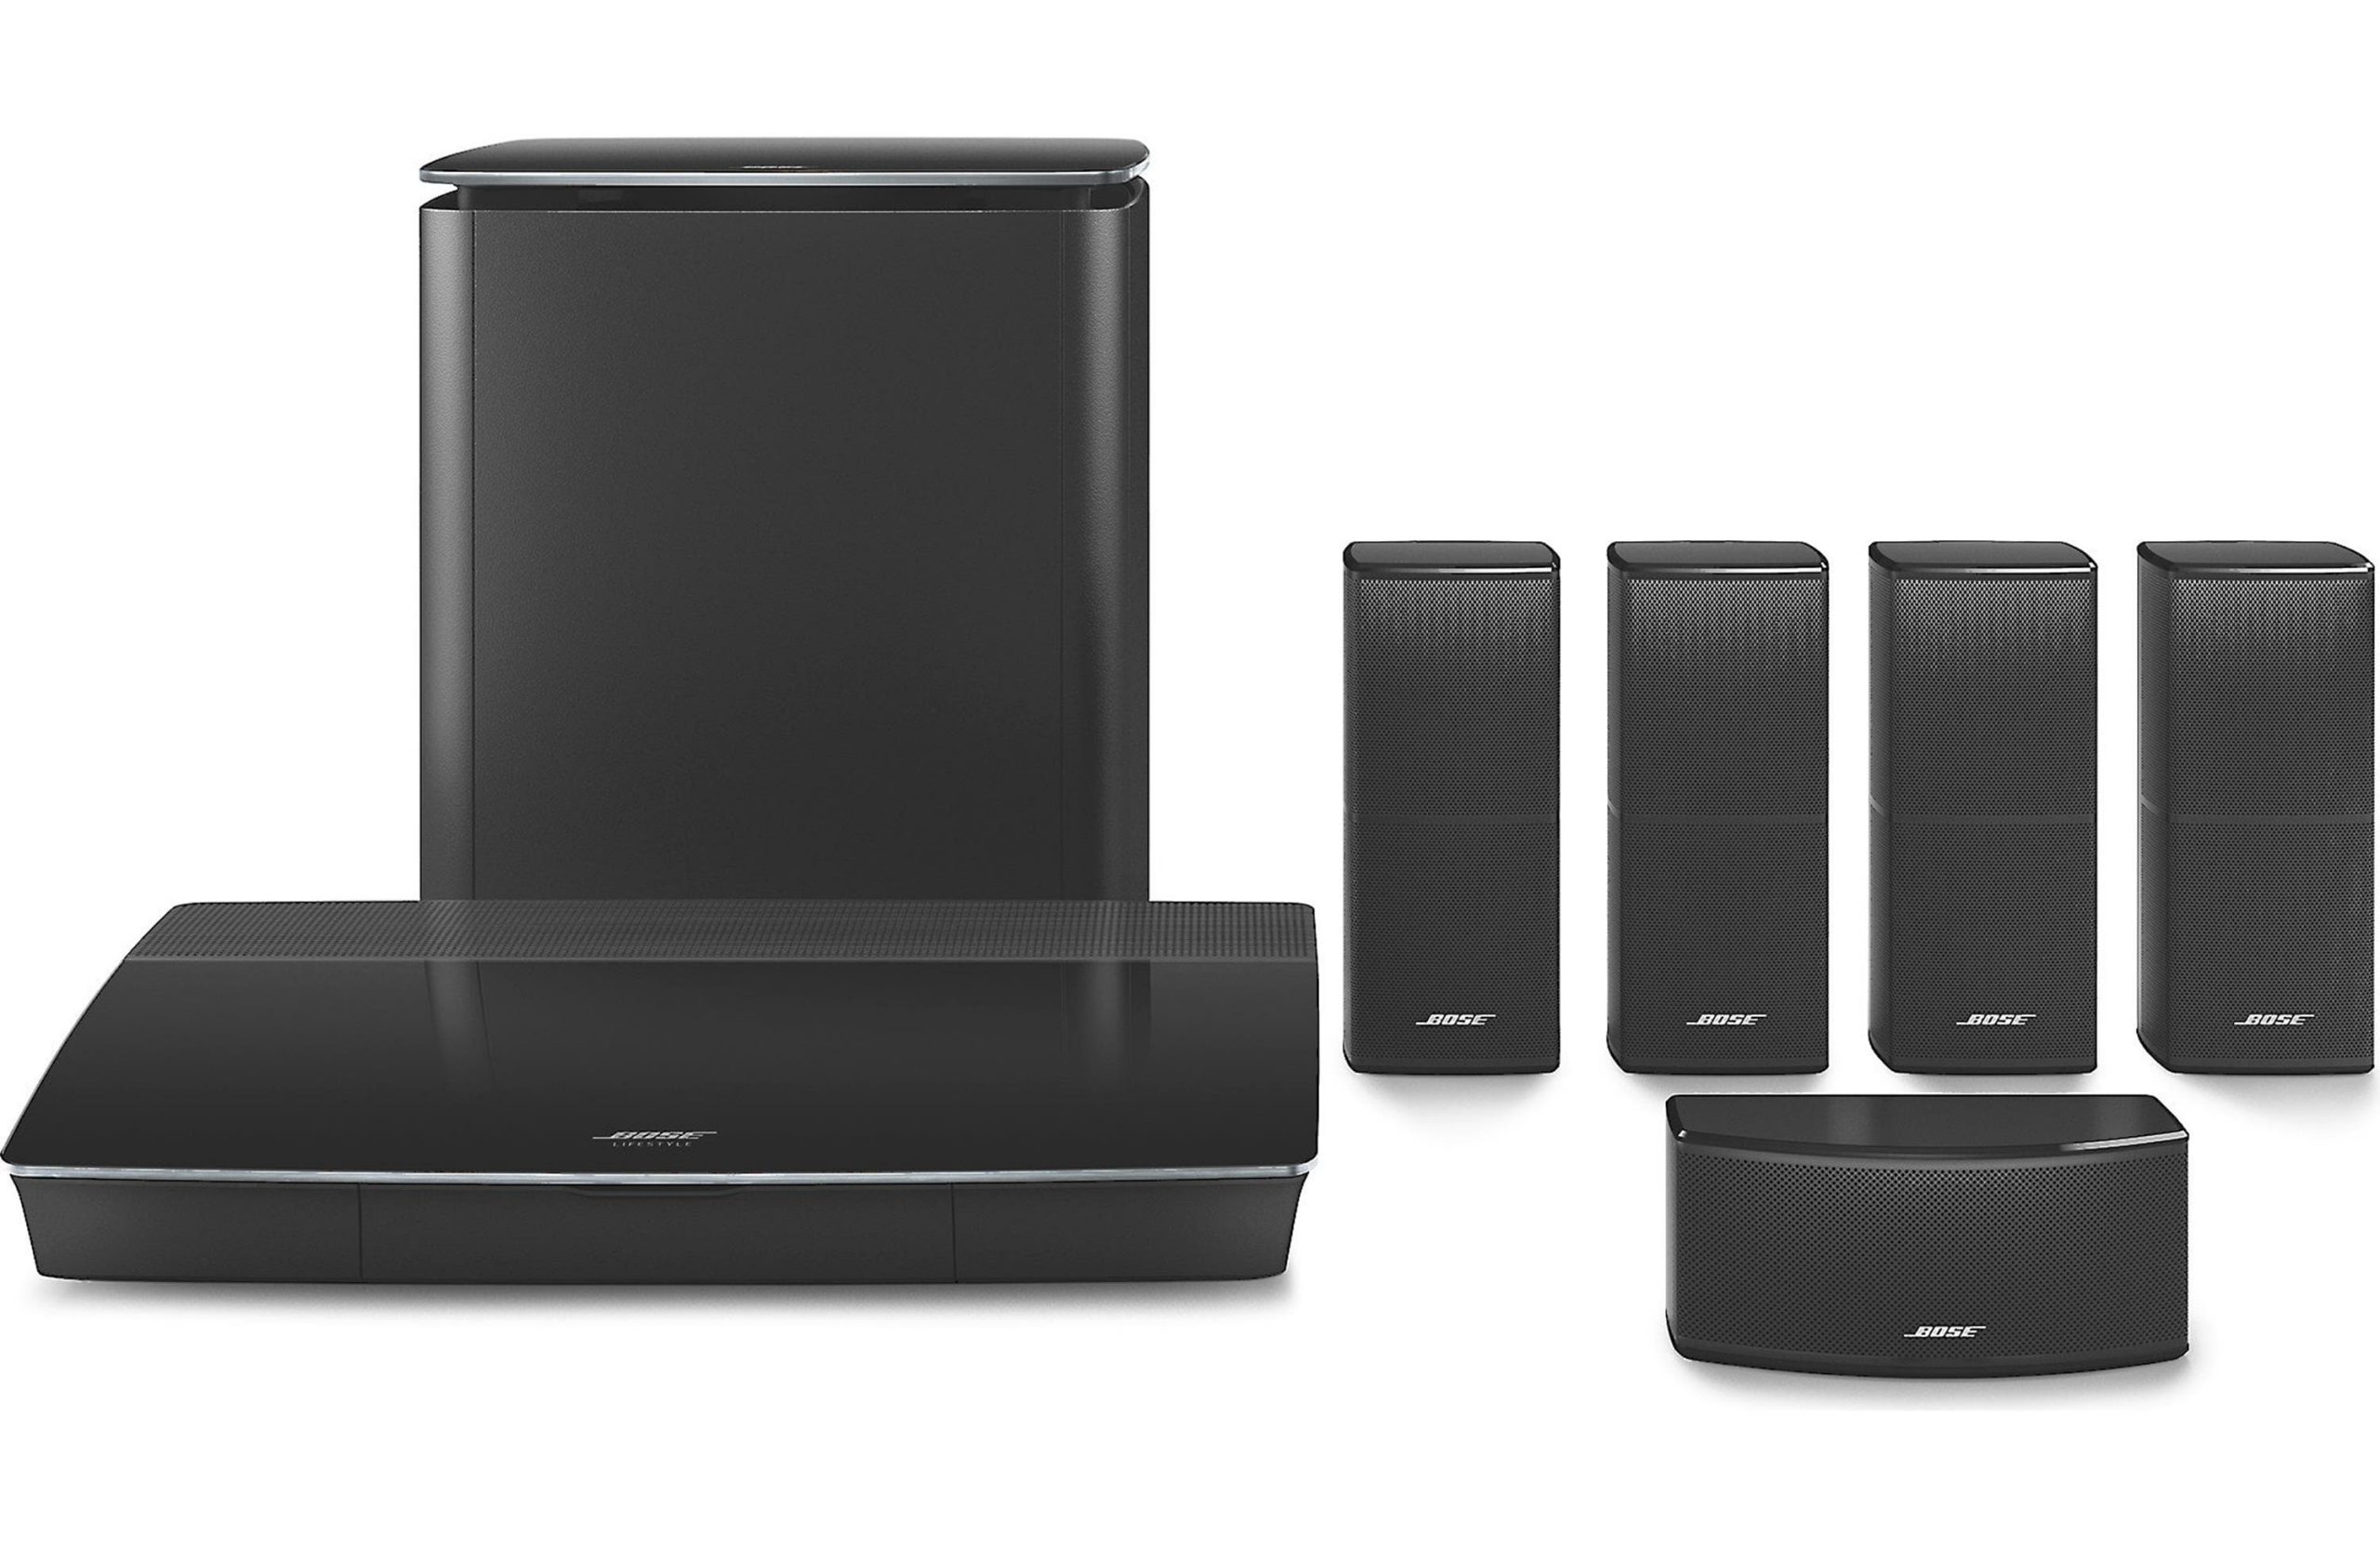 bose 5.1 home theater price